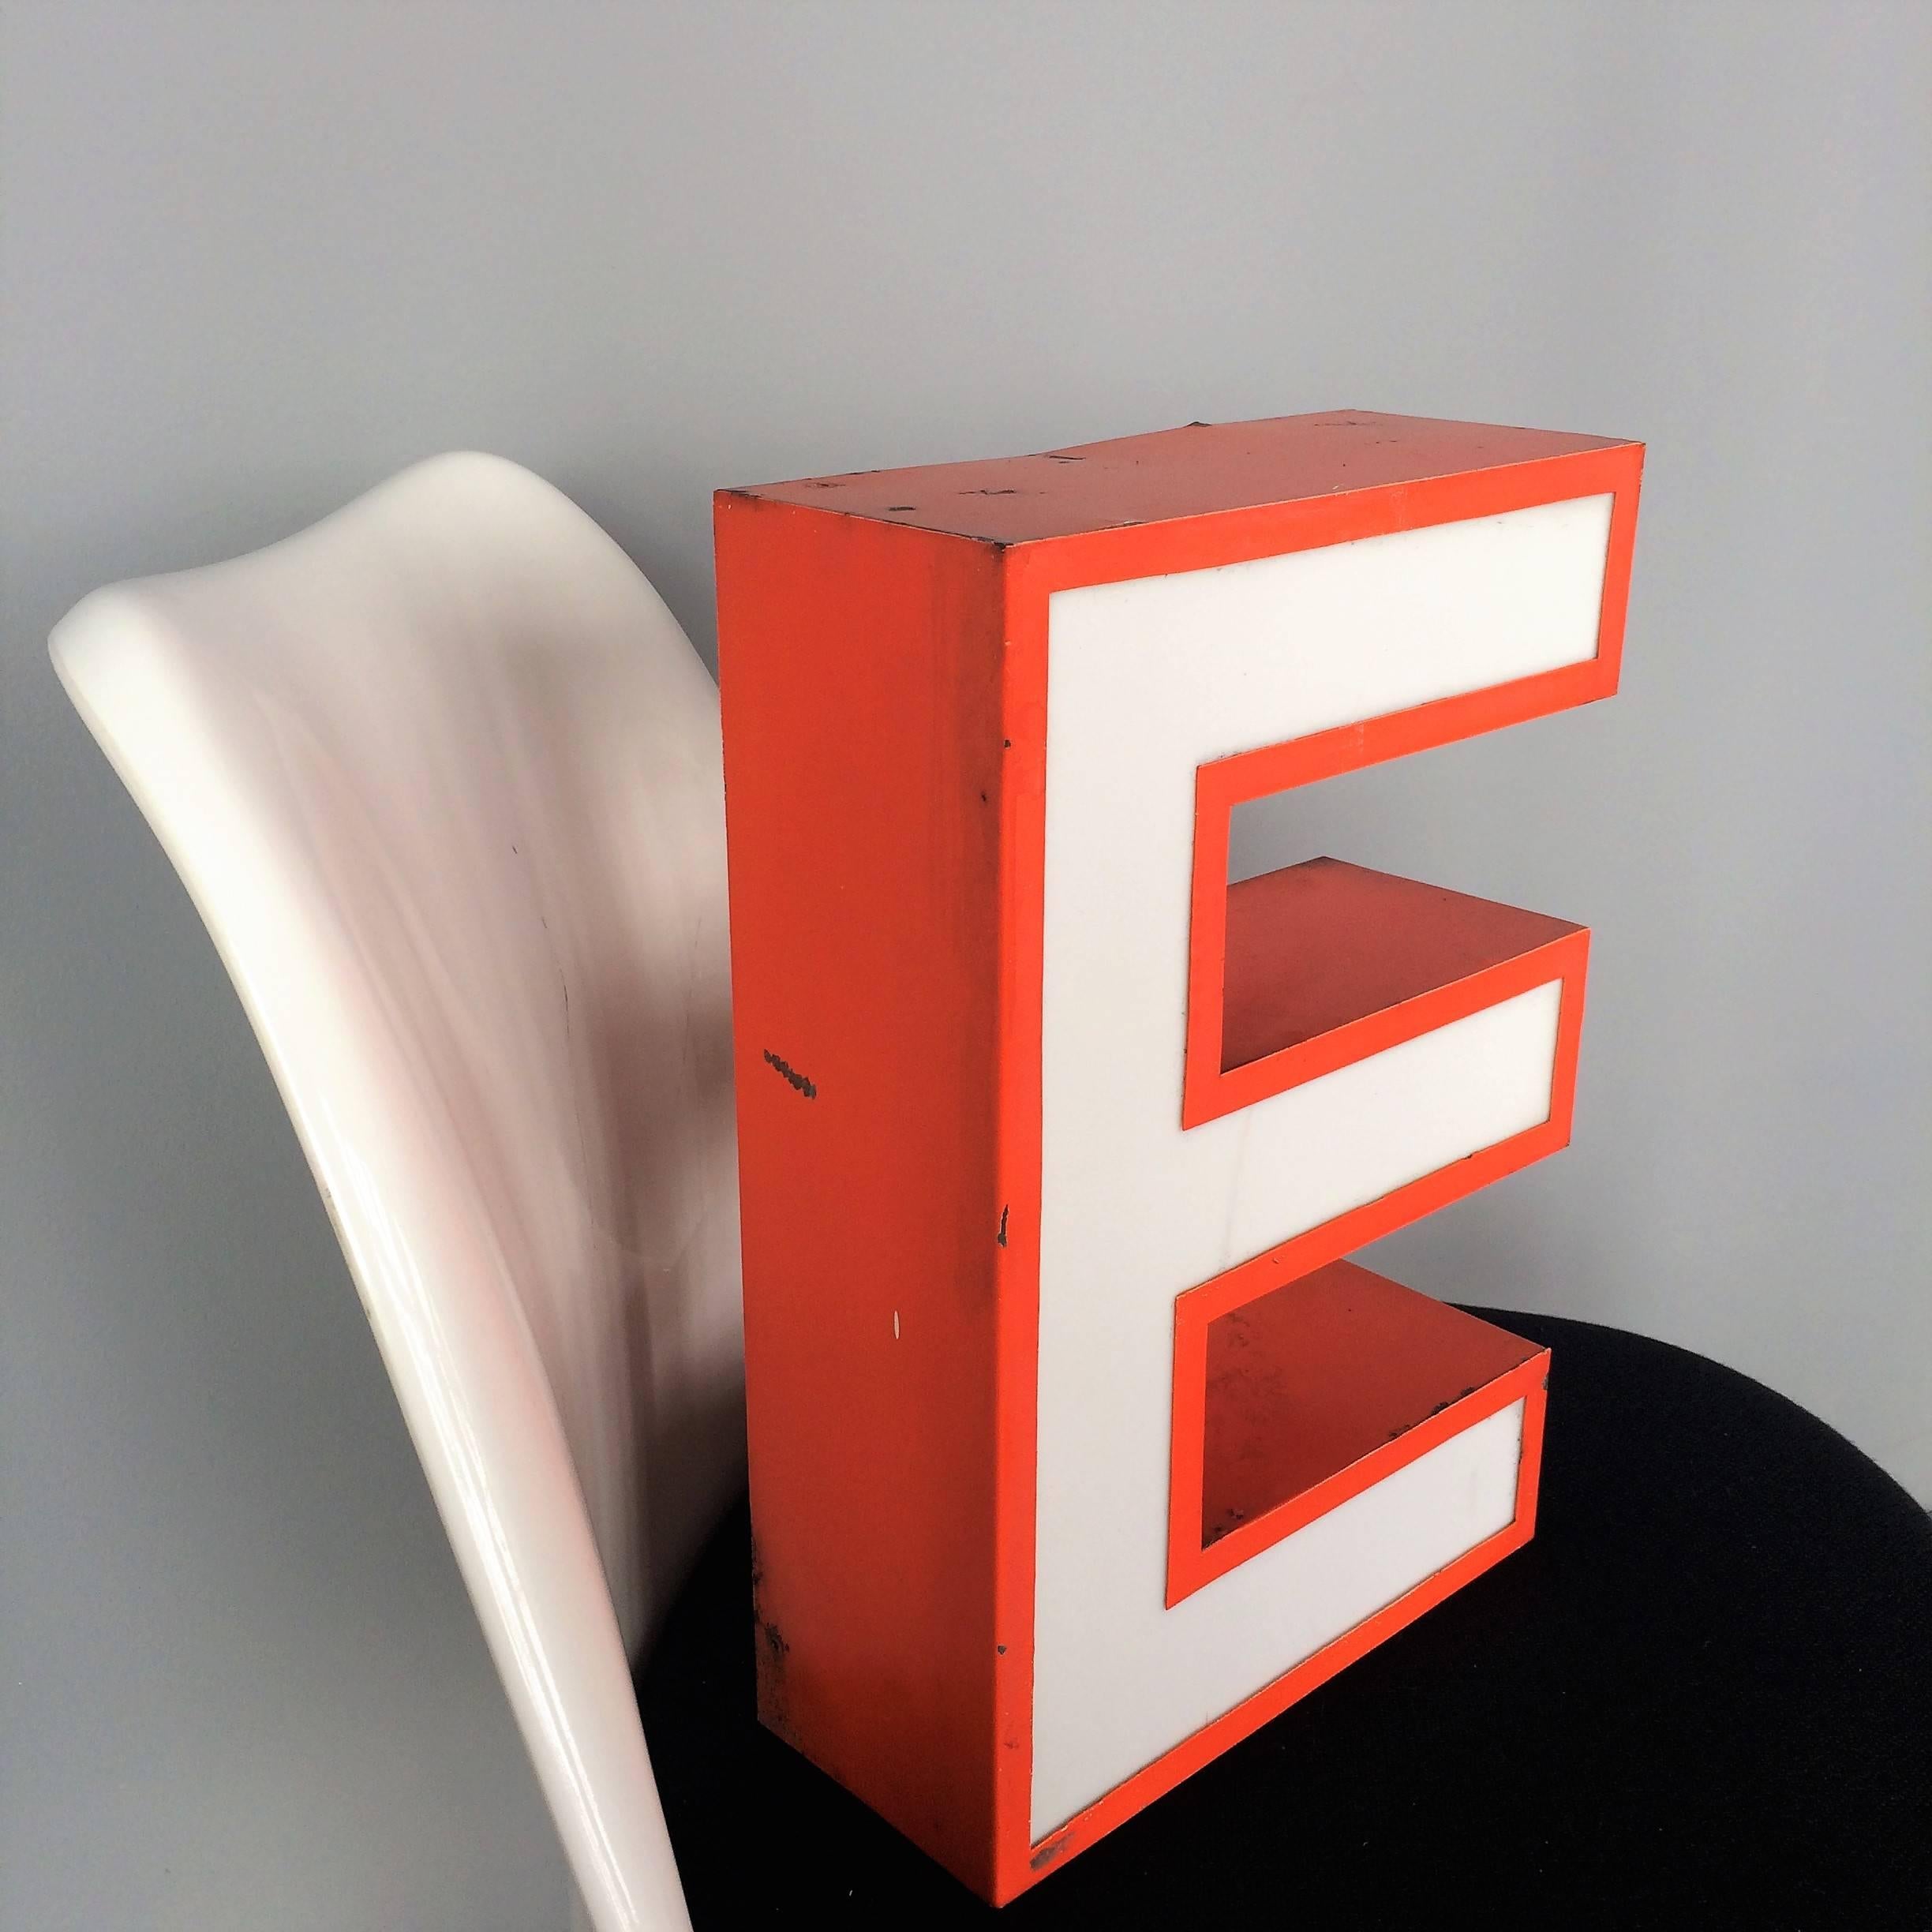 Very decorative handmade lighting letter with white acrylic glass and orange metal body. The letters create a beautifully soft, indirect light. Rewired with new cable and LED's, ready to use.

Measures: Depth 10 cm / 4 in
Height 35 cm / 14 in
Width